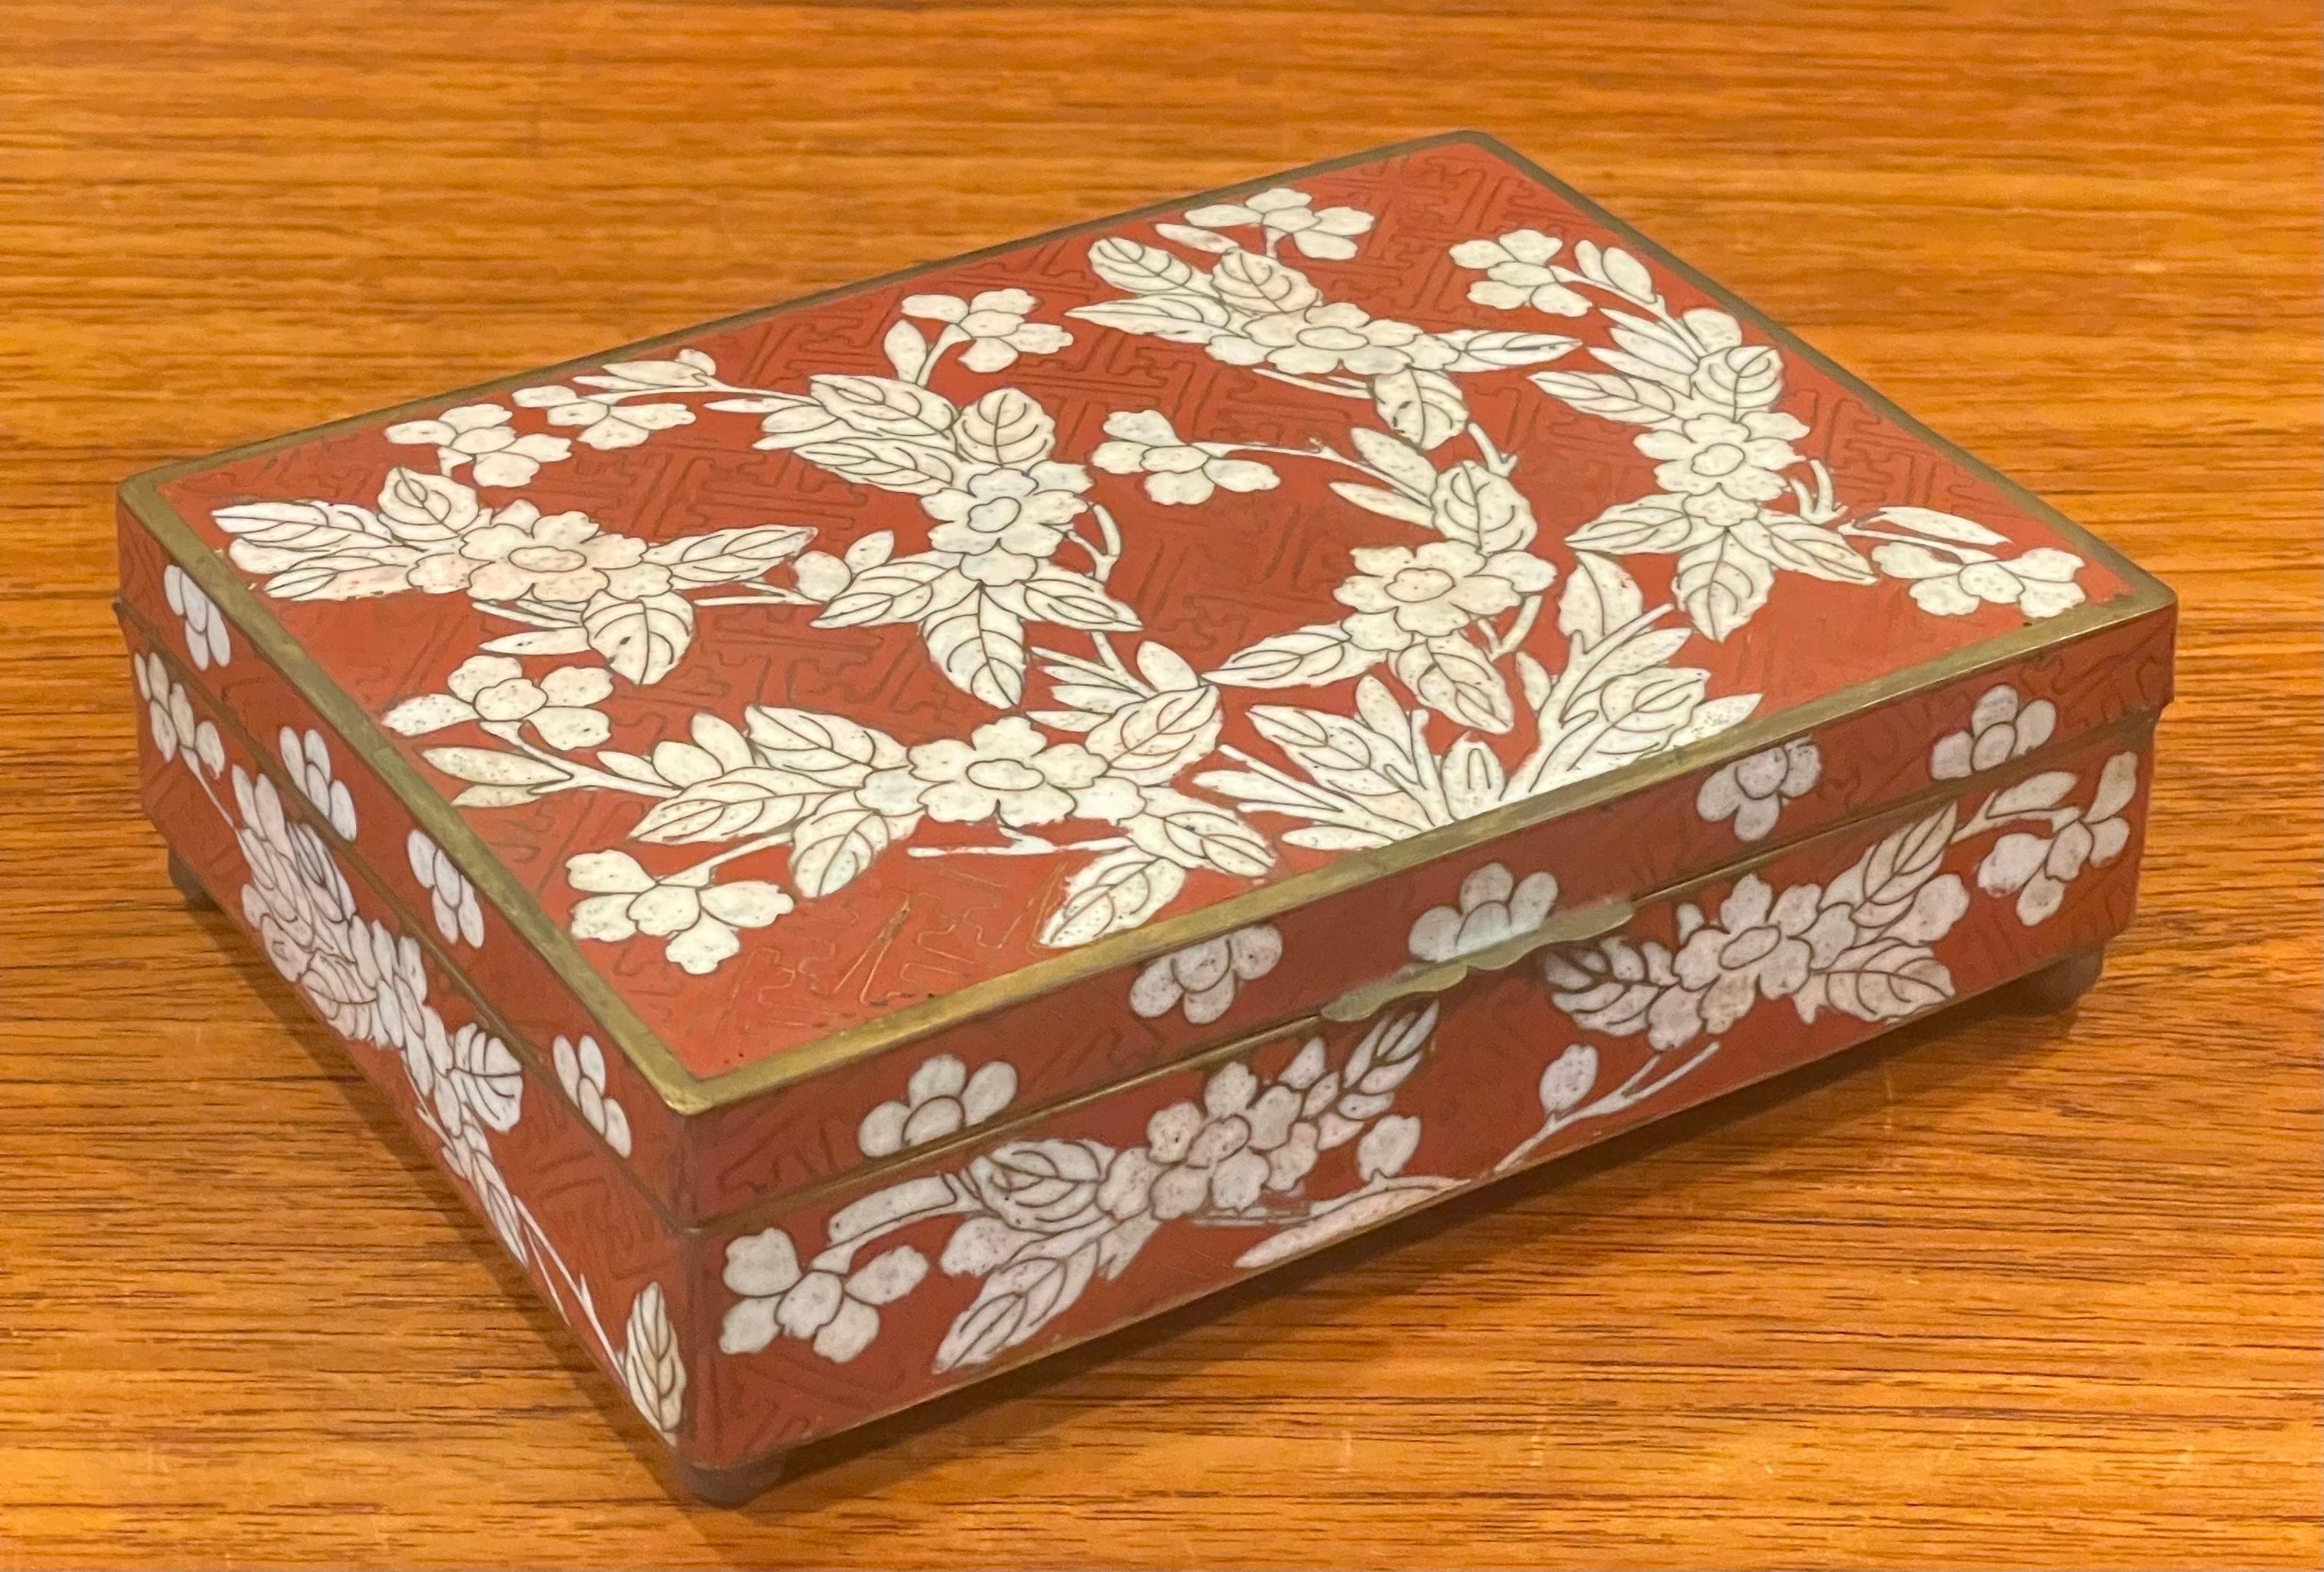 An very nice Japanese cloisonne lidded trinket box with brass bun feet, circa 1940s. The box has a great inticate floral design and is in very good vintage condition; it measures 6.125